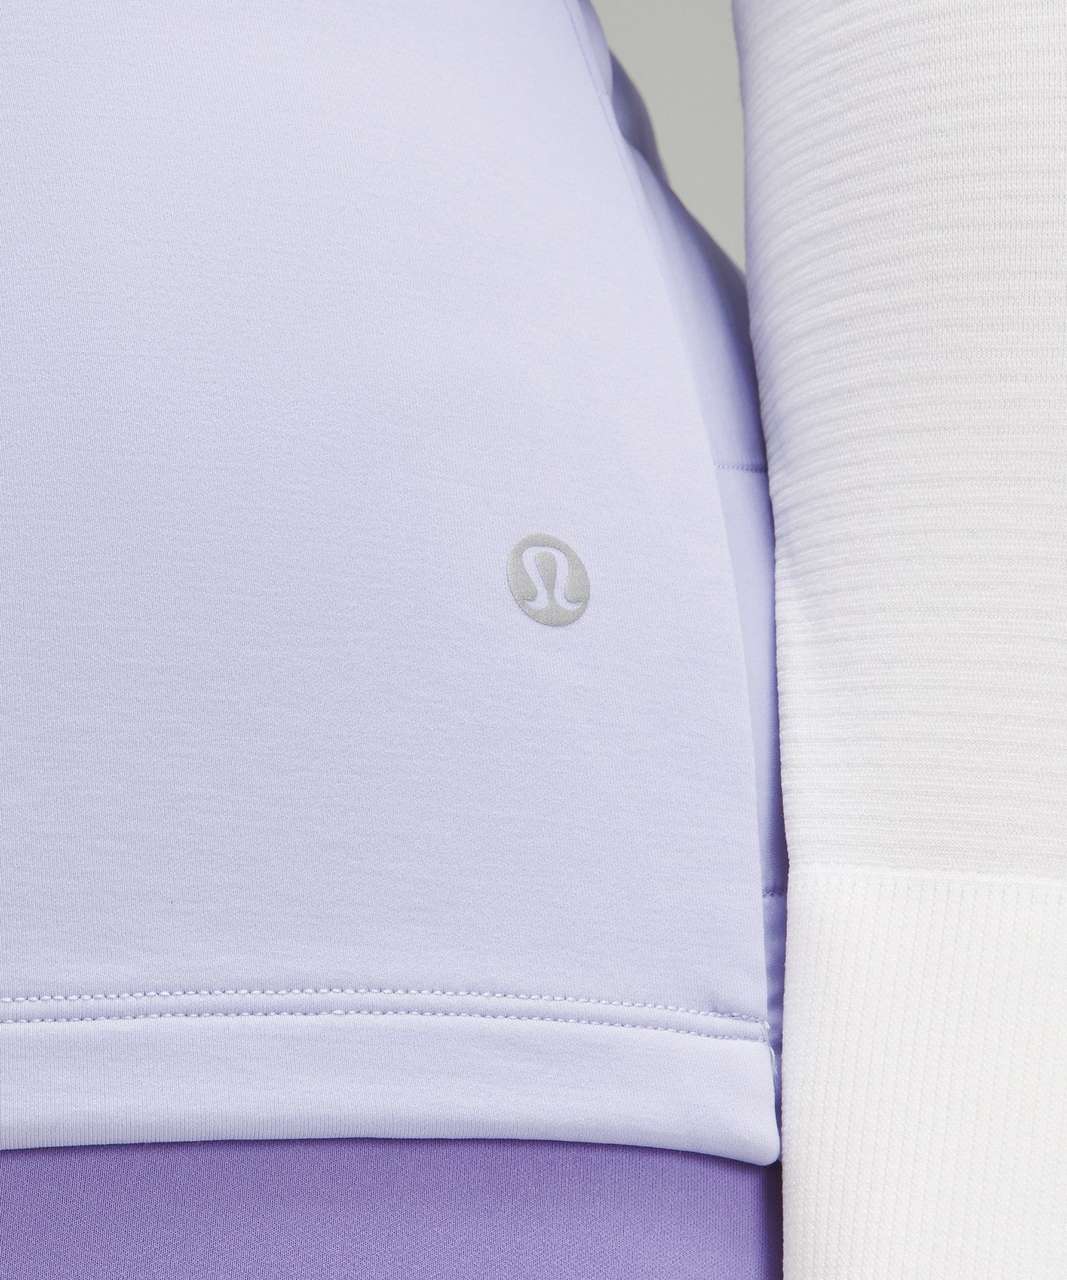 Lululemon Down for It All Vest - Lilac Smoke